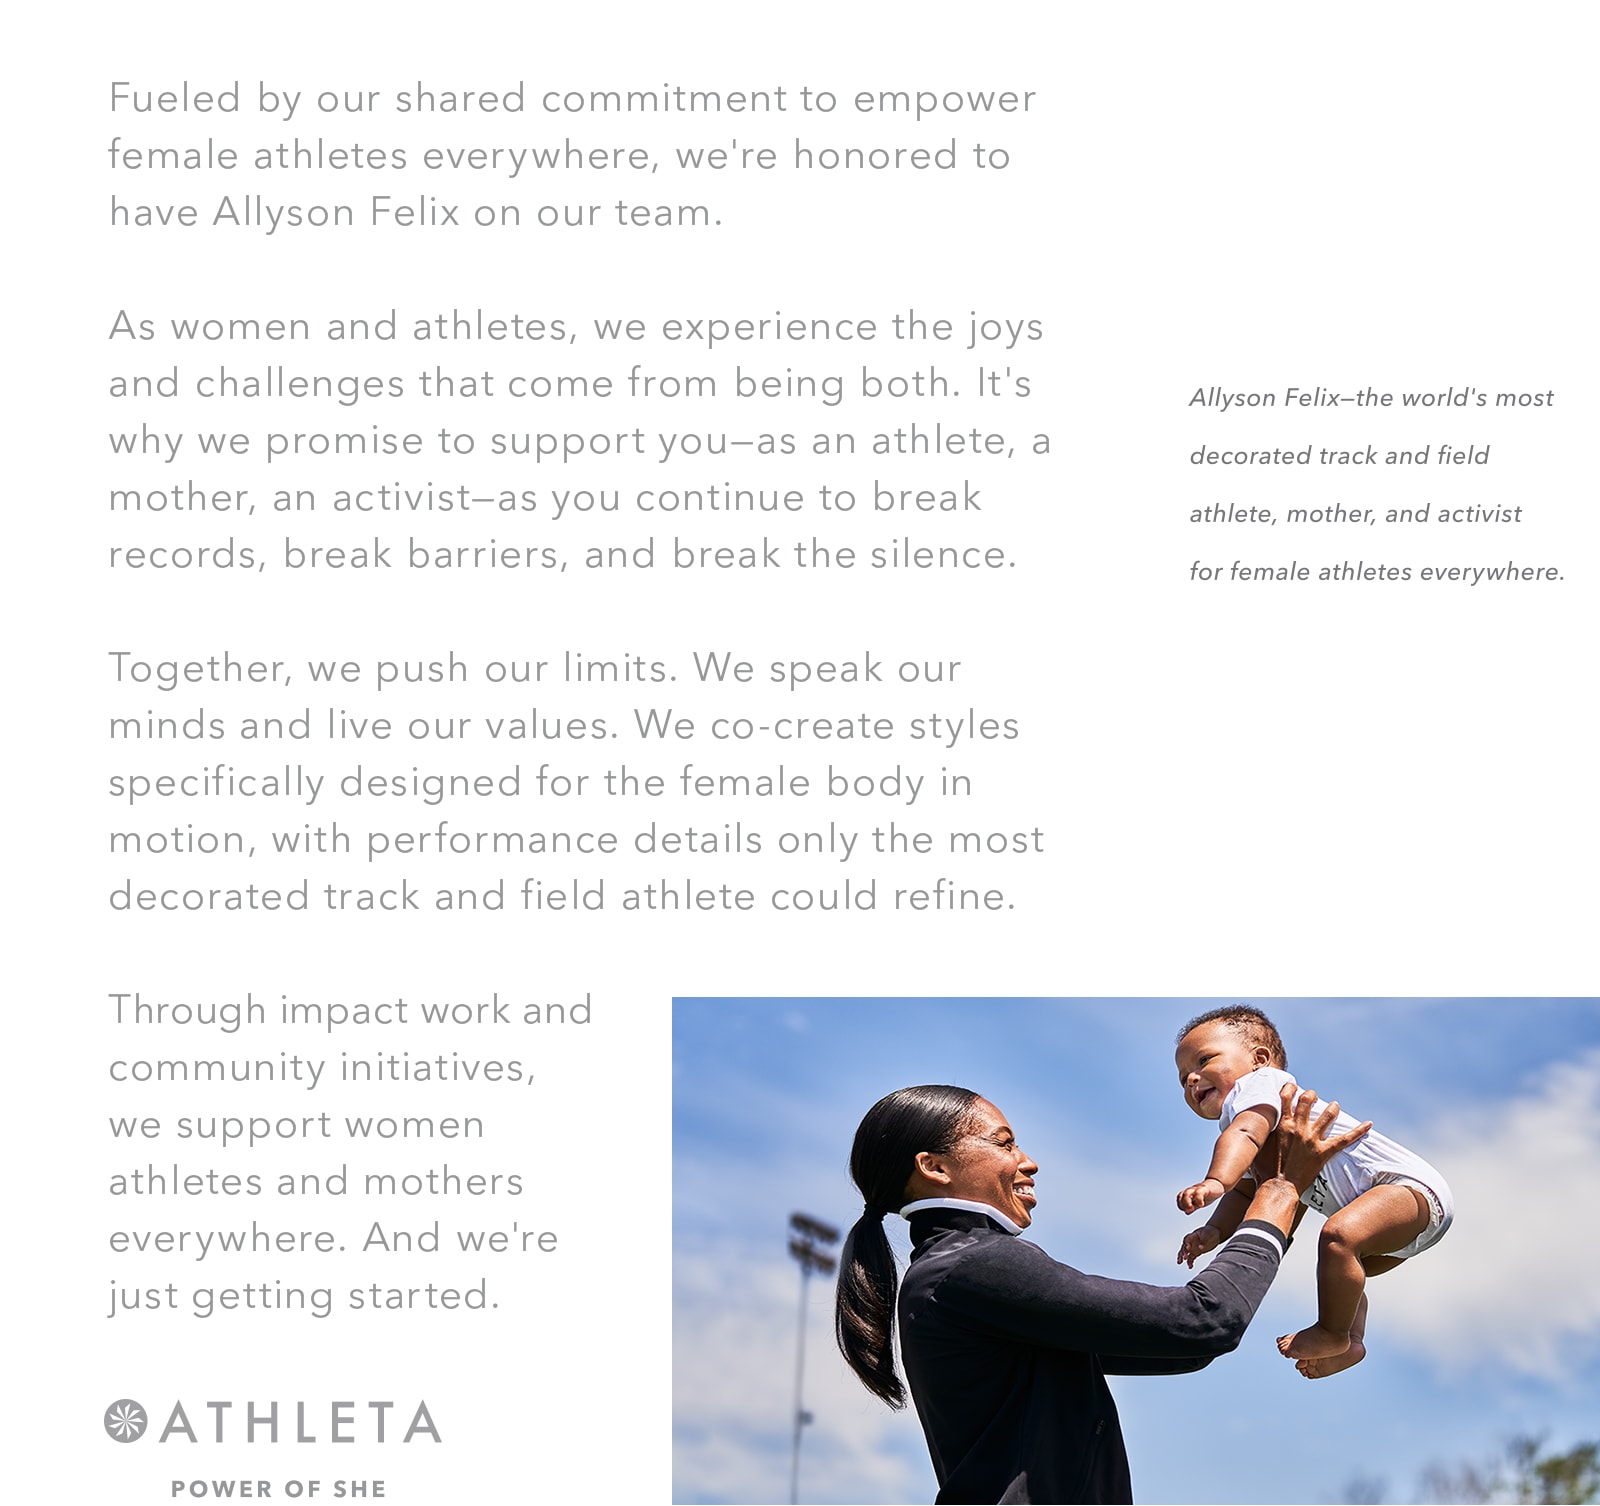 Fueled by our shared commitment to empower female athletes everywhere, we're honored to have Allyson Felix on our team. As women and athletes, we experience the joys and challenges that come from being both. It's why we promise to support you—as an athlete, a mother, an activist—as you continue to break records, break barriers, and break the silence. Together, we push our limits.We speak our minds and live our values.We co-create styles specifically designed for the female body in motion, with performance details only the most decorated track and field athlete could refine.Through impact work and community initiatives, we support women athletes and mothers everywhere.And we're just getting started. ATHLETA POWER OF SHE